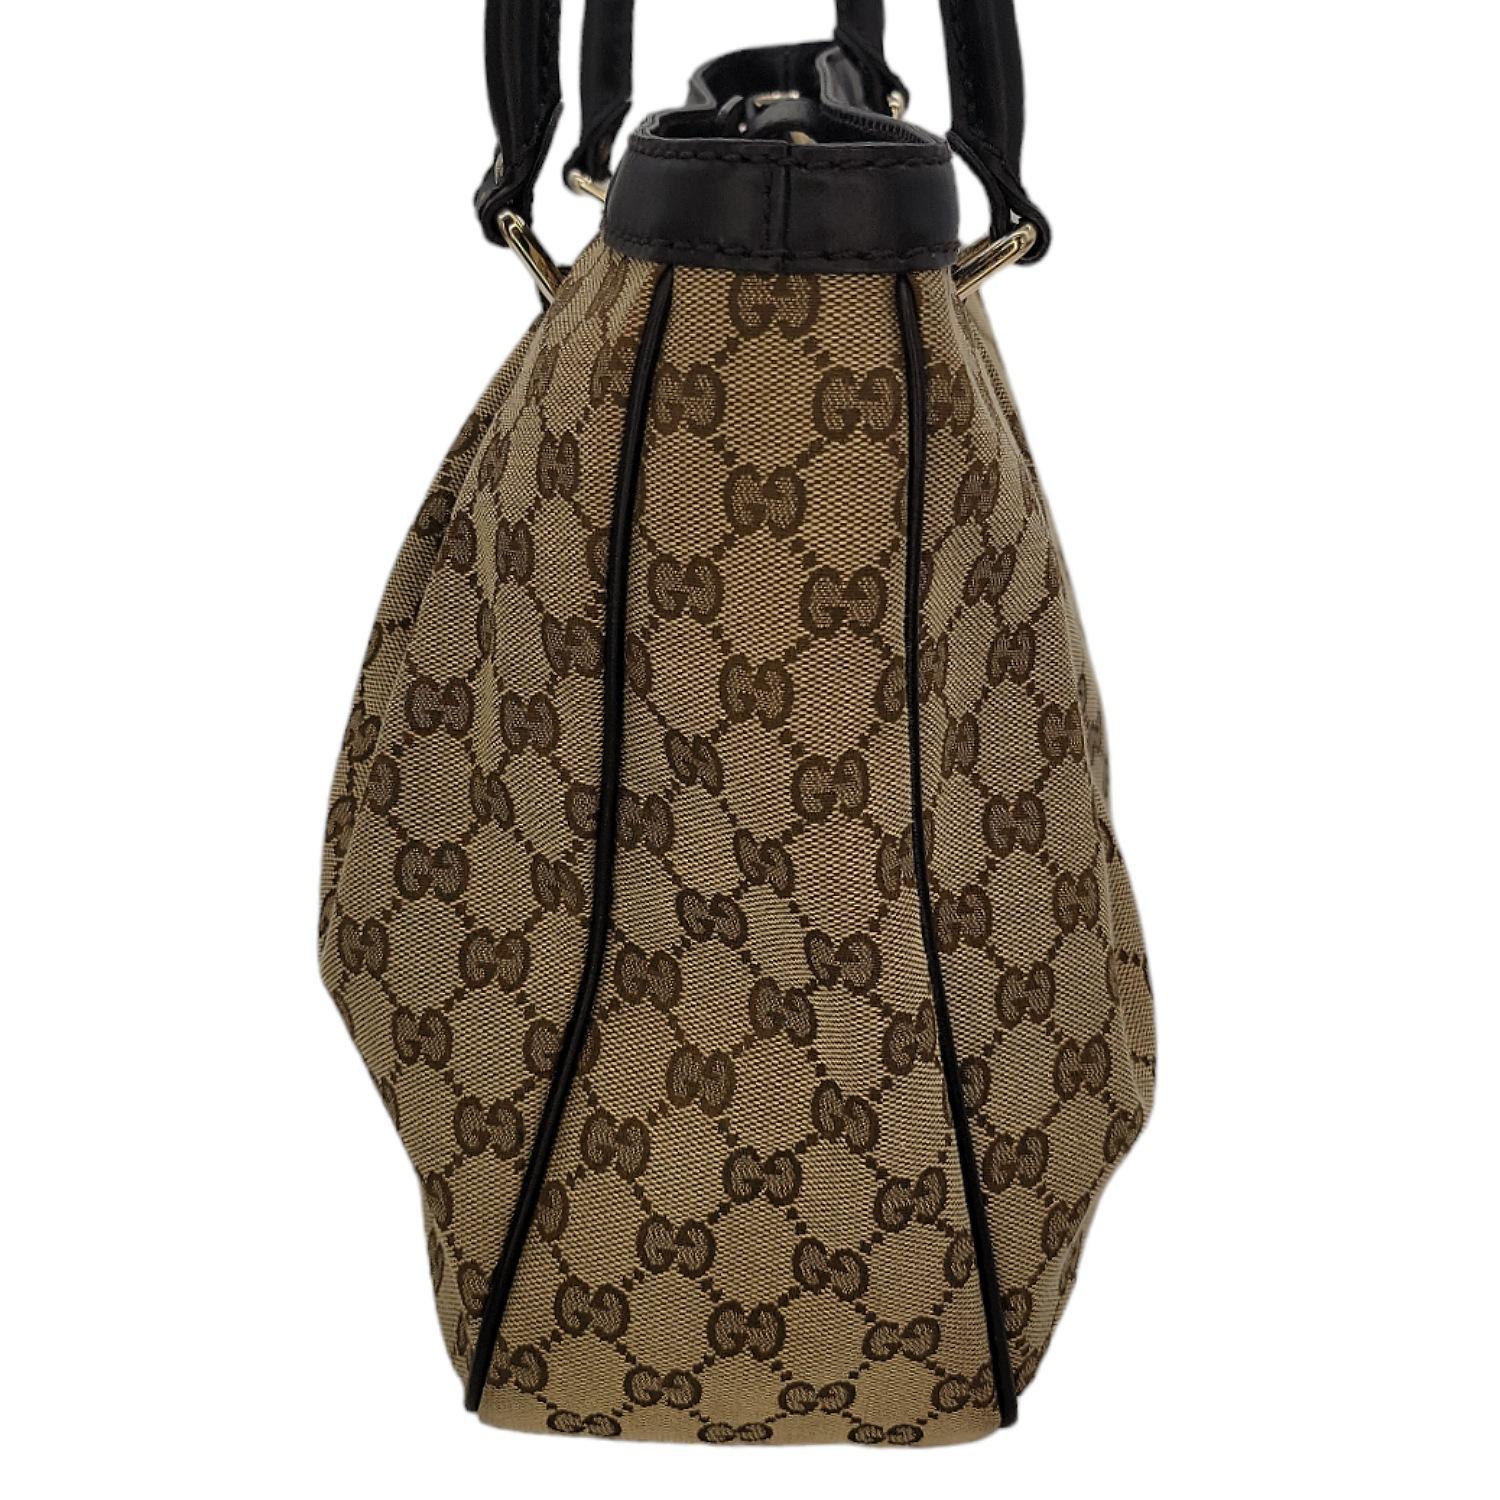 Gucci Brown GG Canvas Medium Sukey Tote Bag In Good Condition For Sale In Scottsdale, AZ